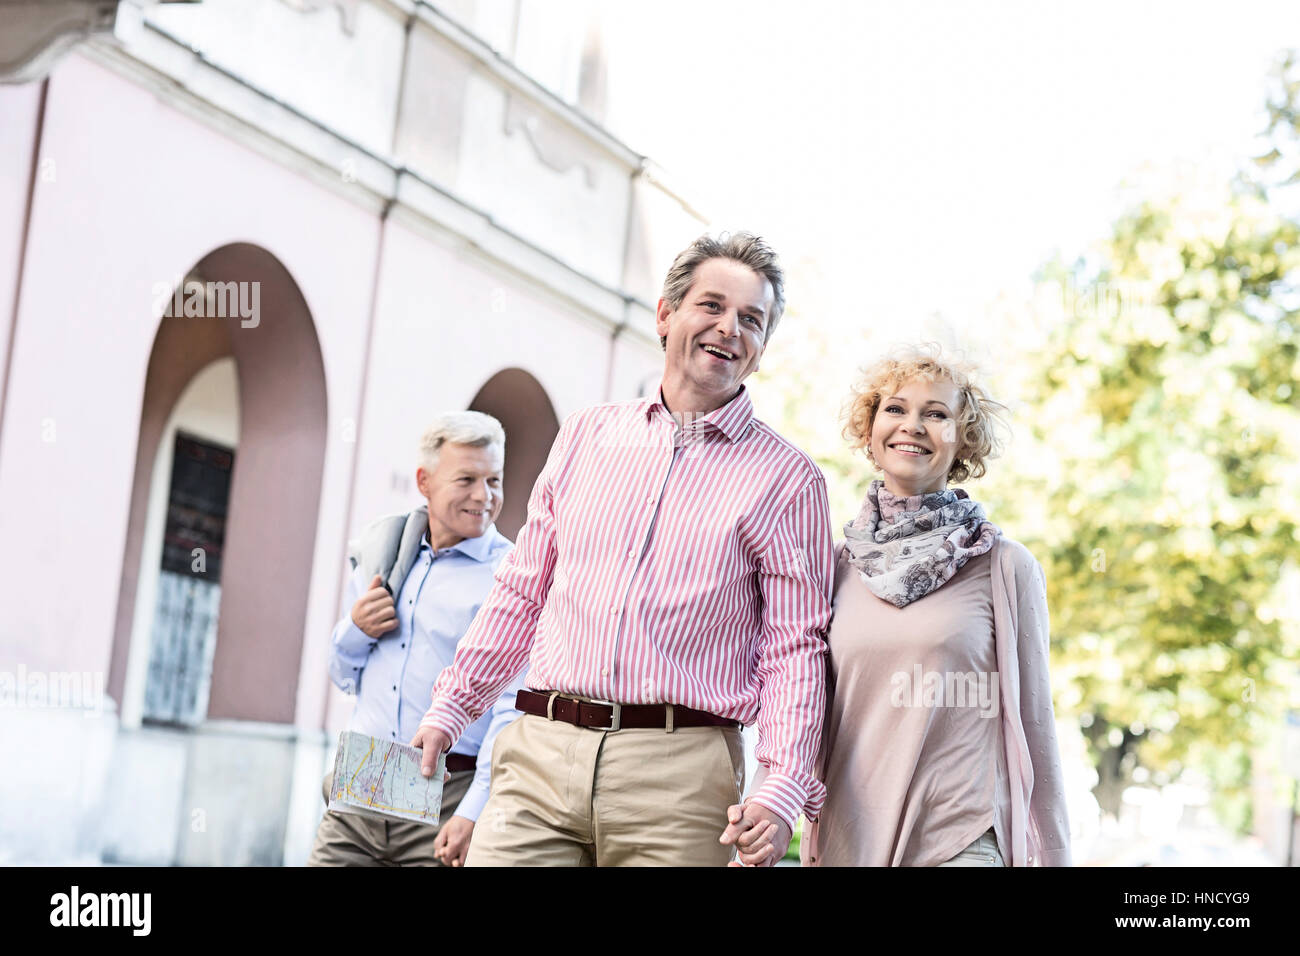 Happy middle-aged couple with map walking in city Stock Photo